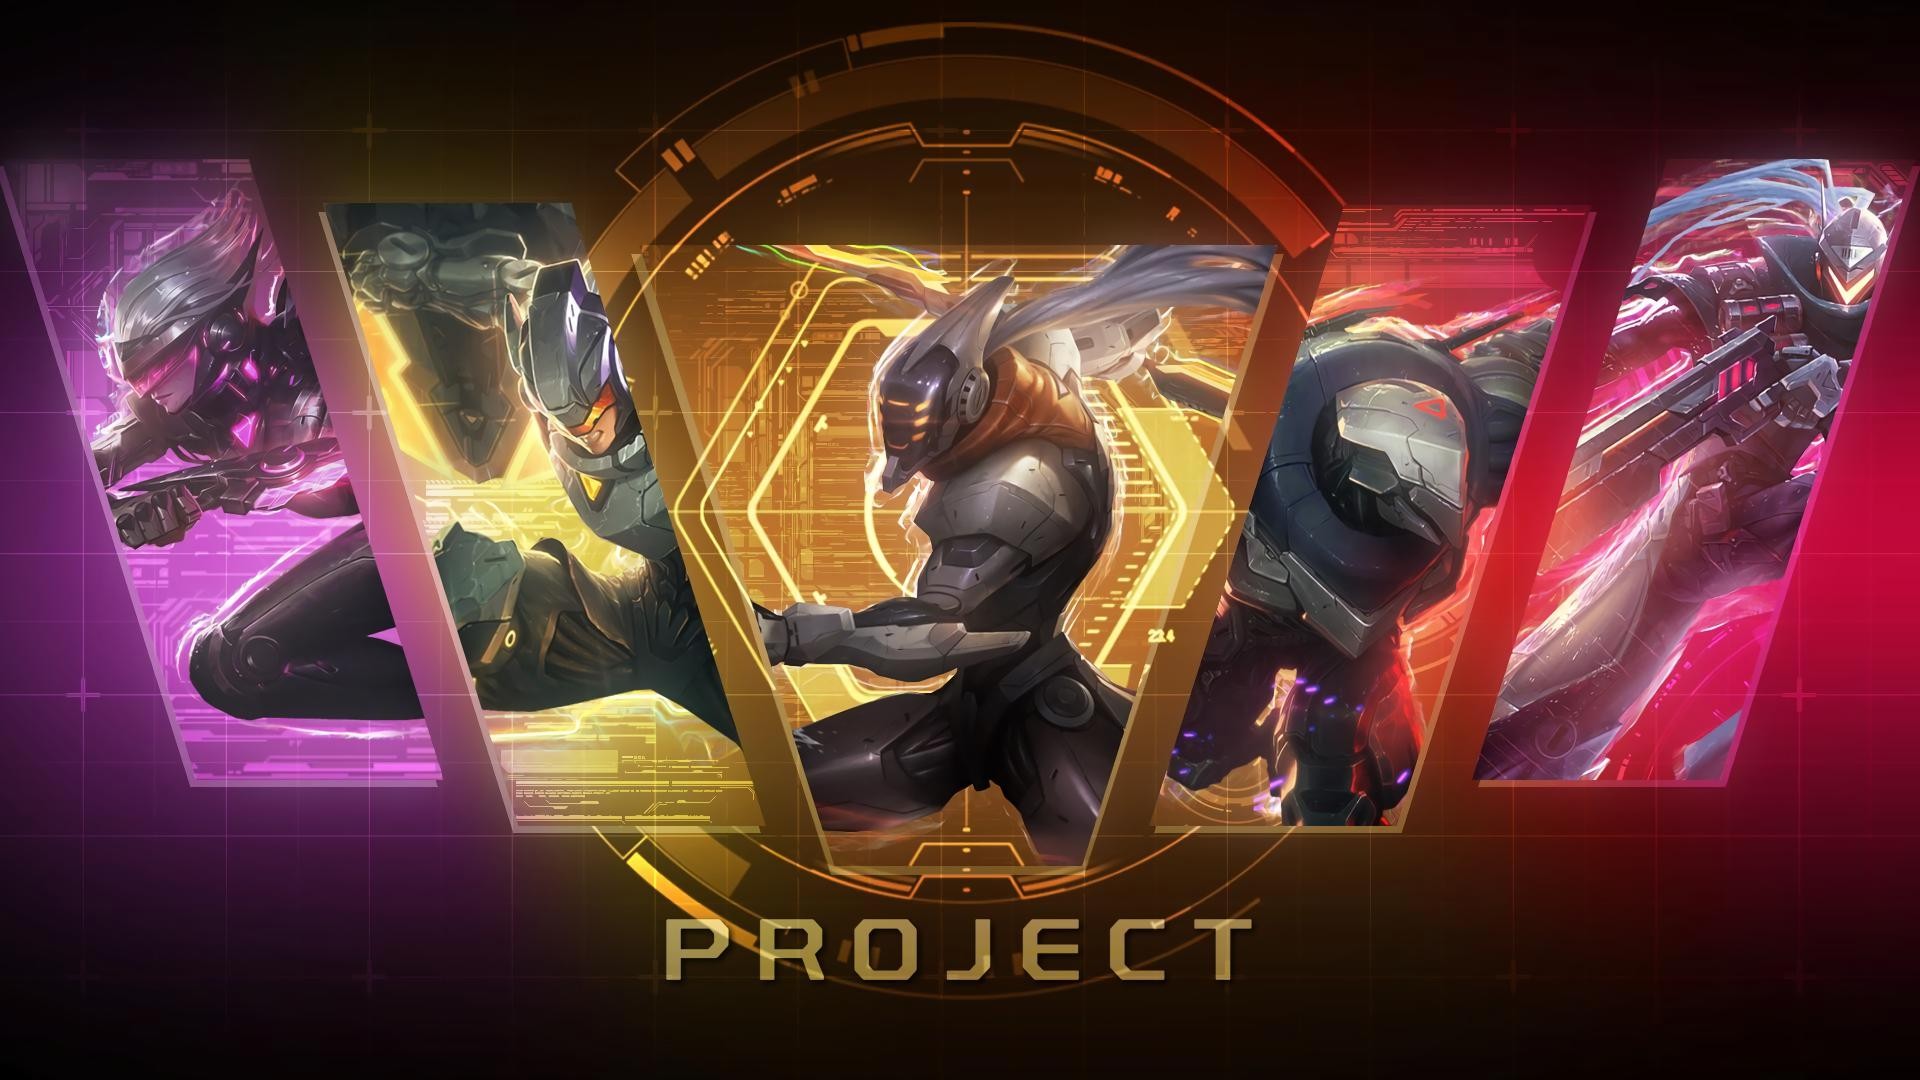 project lucian wallpaper,hero,action figure,games,fictional character,graphic design